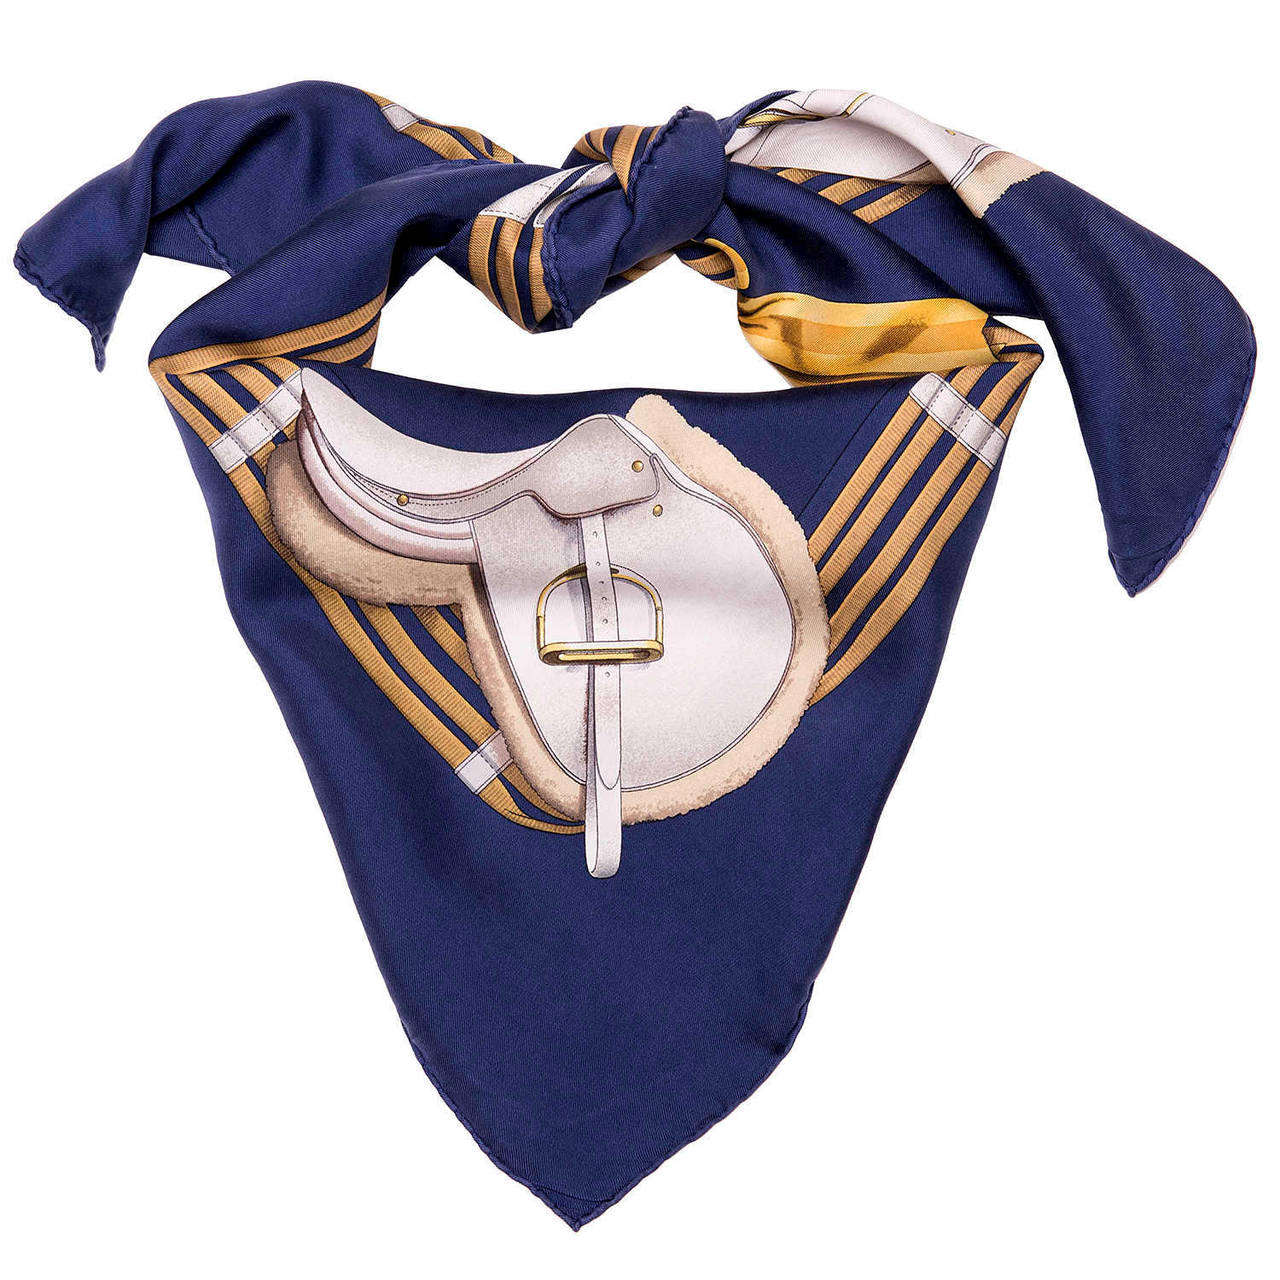 Great Hermes Scarf at a great price by the legendary Hermes designer Philippe Ledoux. Any horse lovers or anybody connected with the equestrian world will love this scarf with it's equine themed design.

FREE WORLDWIDE DELIVERY IS INCLUDED IN THE